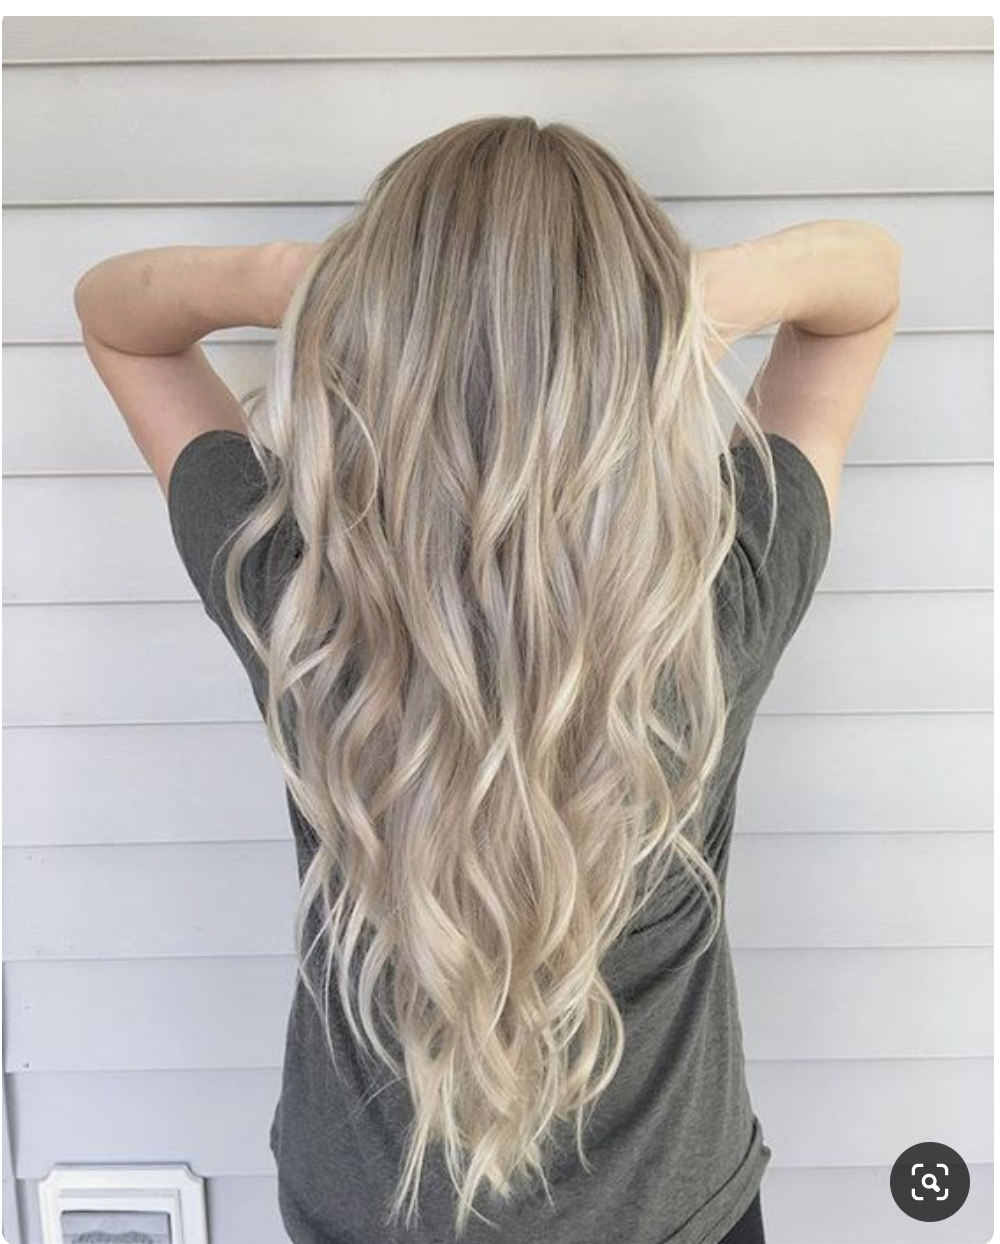 #18/60/18 "ICONIC BLONDE" ROOTS STRETCH TO ASH BLONDE FOILED BALAYAGE CLIP IN HAIR EXTENSIONS. - Pure Tape Hair Extensions 